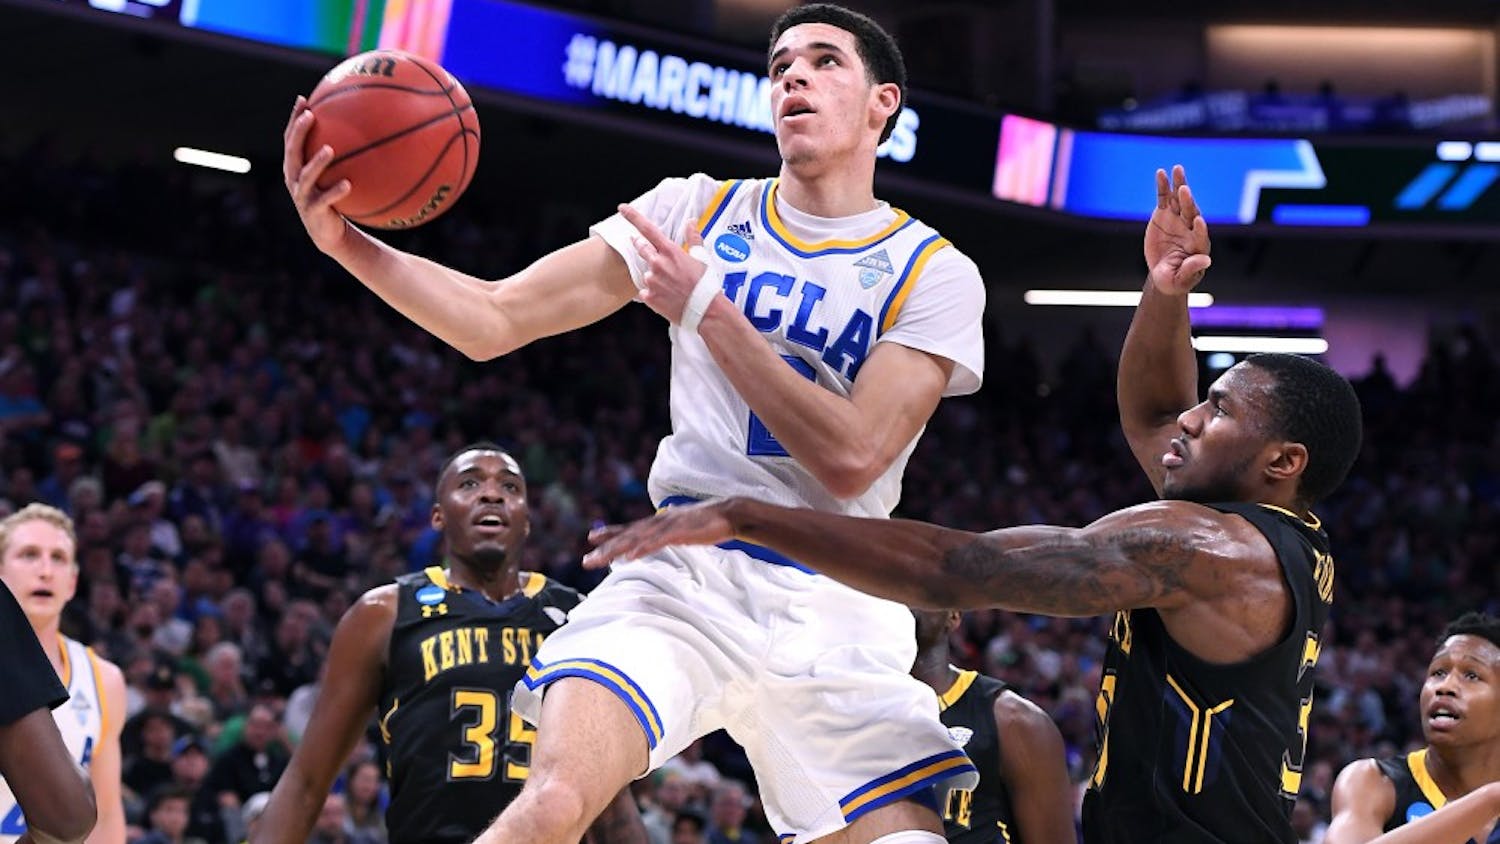 UCLA's Lonzo Ball, middle, scores a basket and draws a foul against Kent State's Kevin Zabo during the first half in the first round of the NCAA Tournament at the Golden 1 Center in Sacramento, Calif., on Friday, March 17, 2017. UCLA advanced, 97-80. (Wally Skalij/Los Angeles Times/TNS)